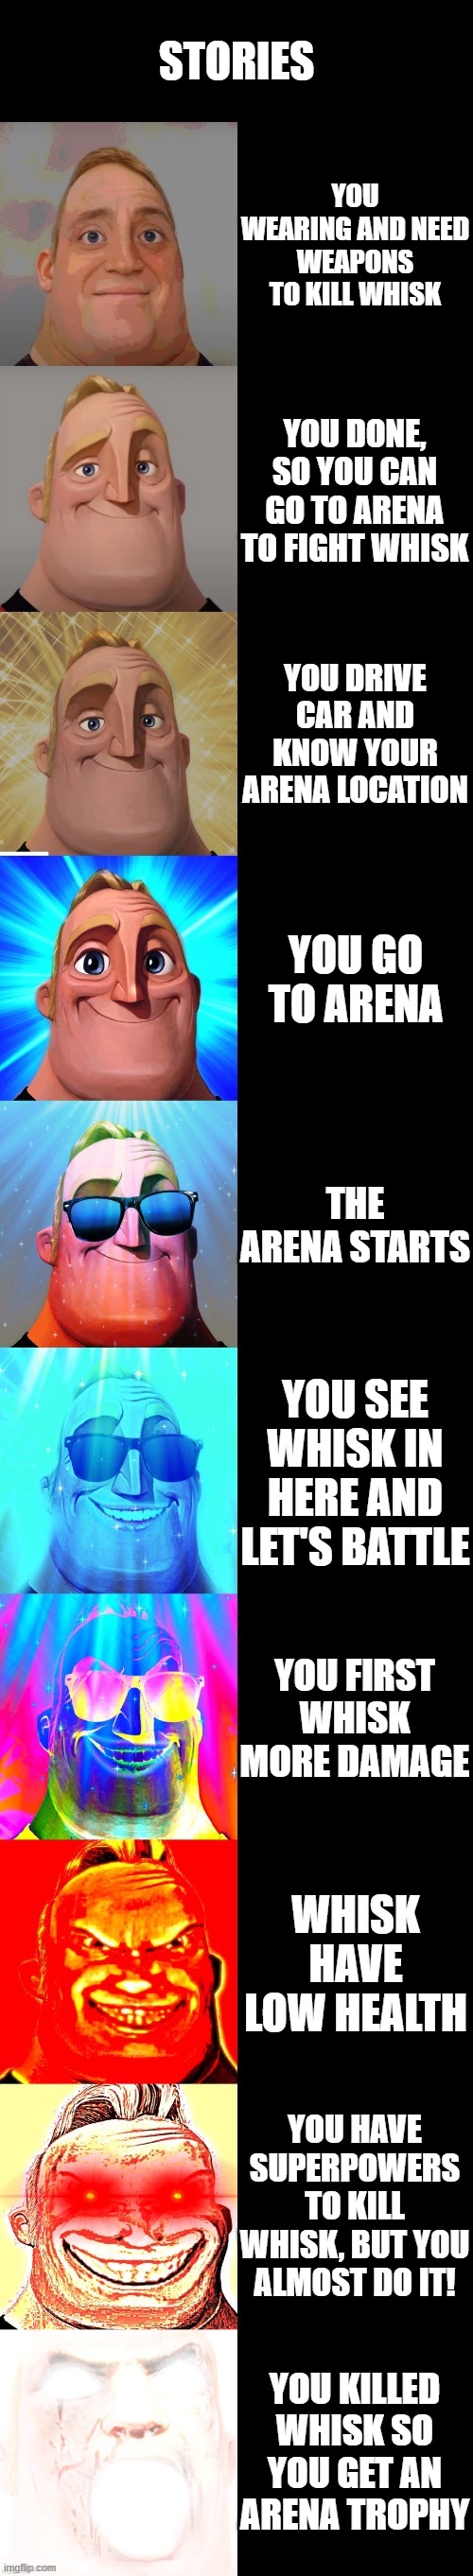 mr incredible becoming canny | STORIES; YOU WEARING AND NEED WEAPONS TO KILL WHISK; YOU DONE, SO YOU CAN GO TO ARENA TO FIGHT WHISK; YOU DRIVE CAR AND KNOW YOUR ARENA LOCATION; YOU GO TO ARENA; THE ARENA STARTS; YOU SEE WHISK IN HERE AND LET'S BATTLE; YOU FIRST WHISK MORE DAMAGE; WHISK HAVE LOW HEALTH; YOU HAVE SUPERPOWERS TO KILL WHISK, BUT YOU ALMOST DO IT! YOU KILLED WHISK SO YOU GET AN ARENA TROPHY | image tagged in mr incredible becoming canny | made w/ Imgflip meme maker